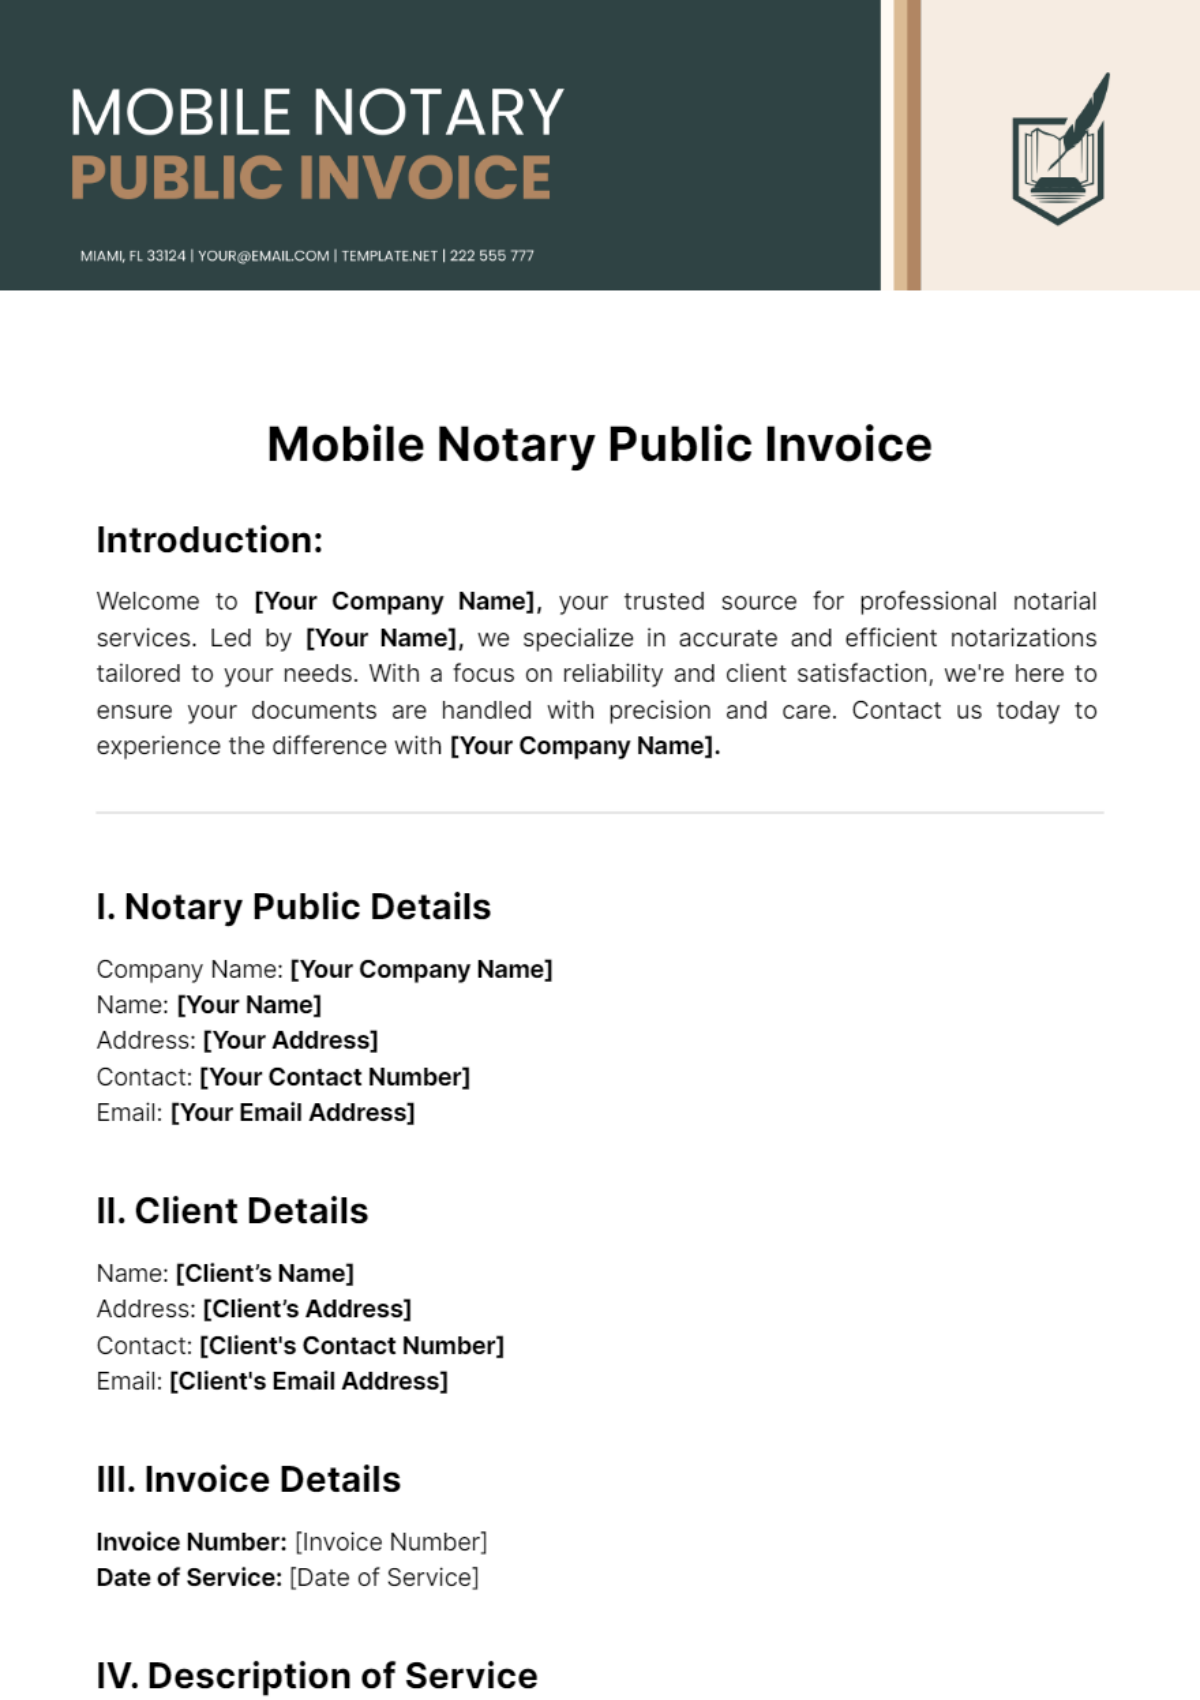 Free Mobile Notary Public Invoice Template